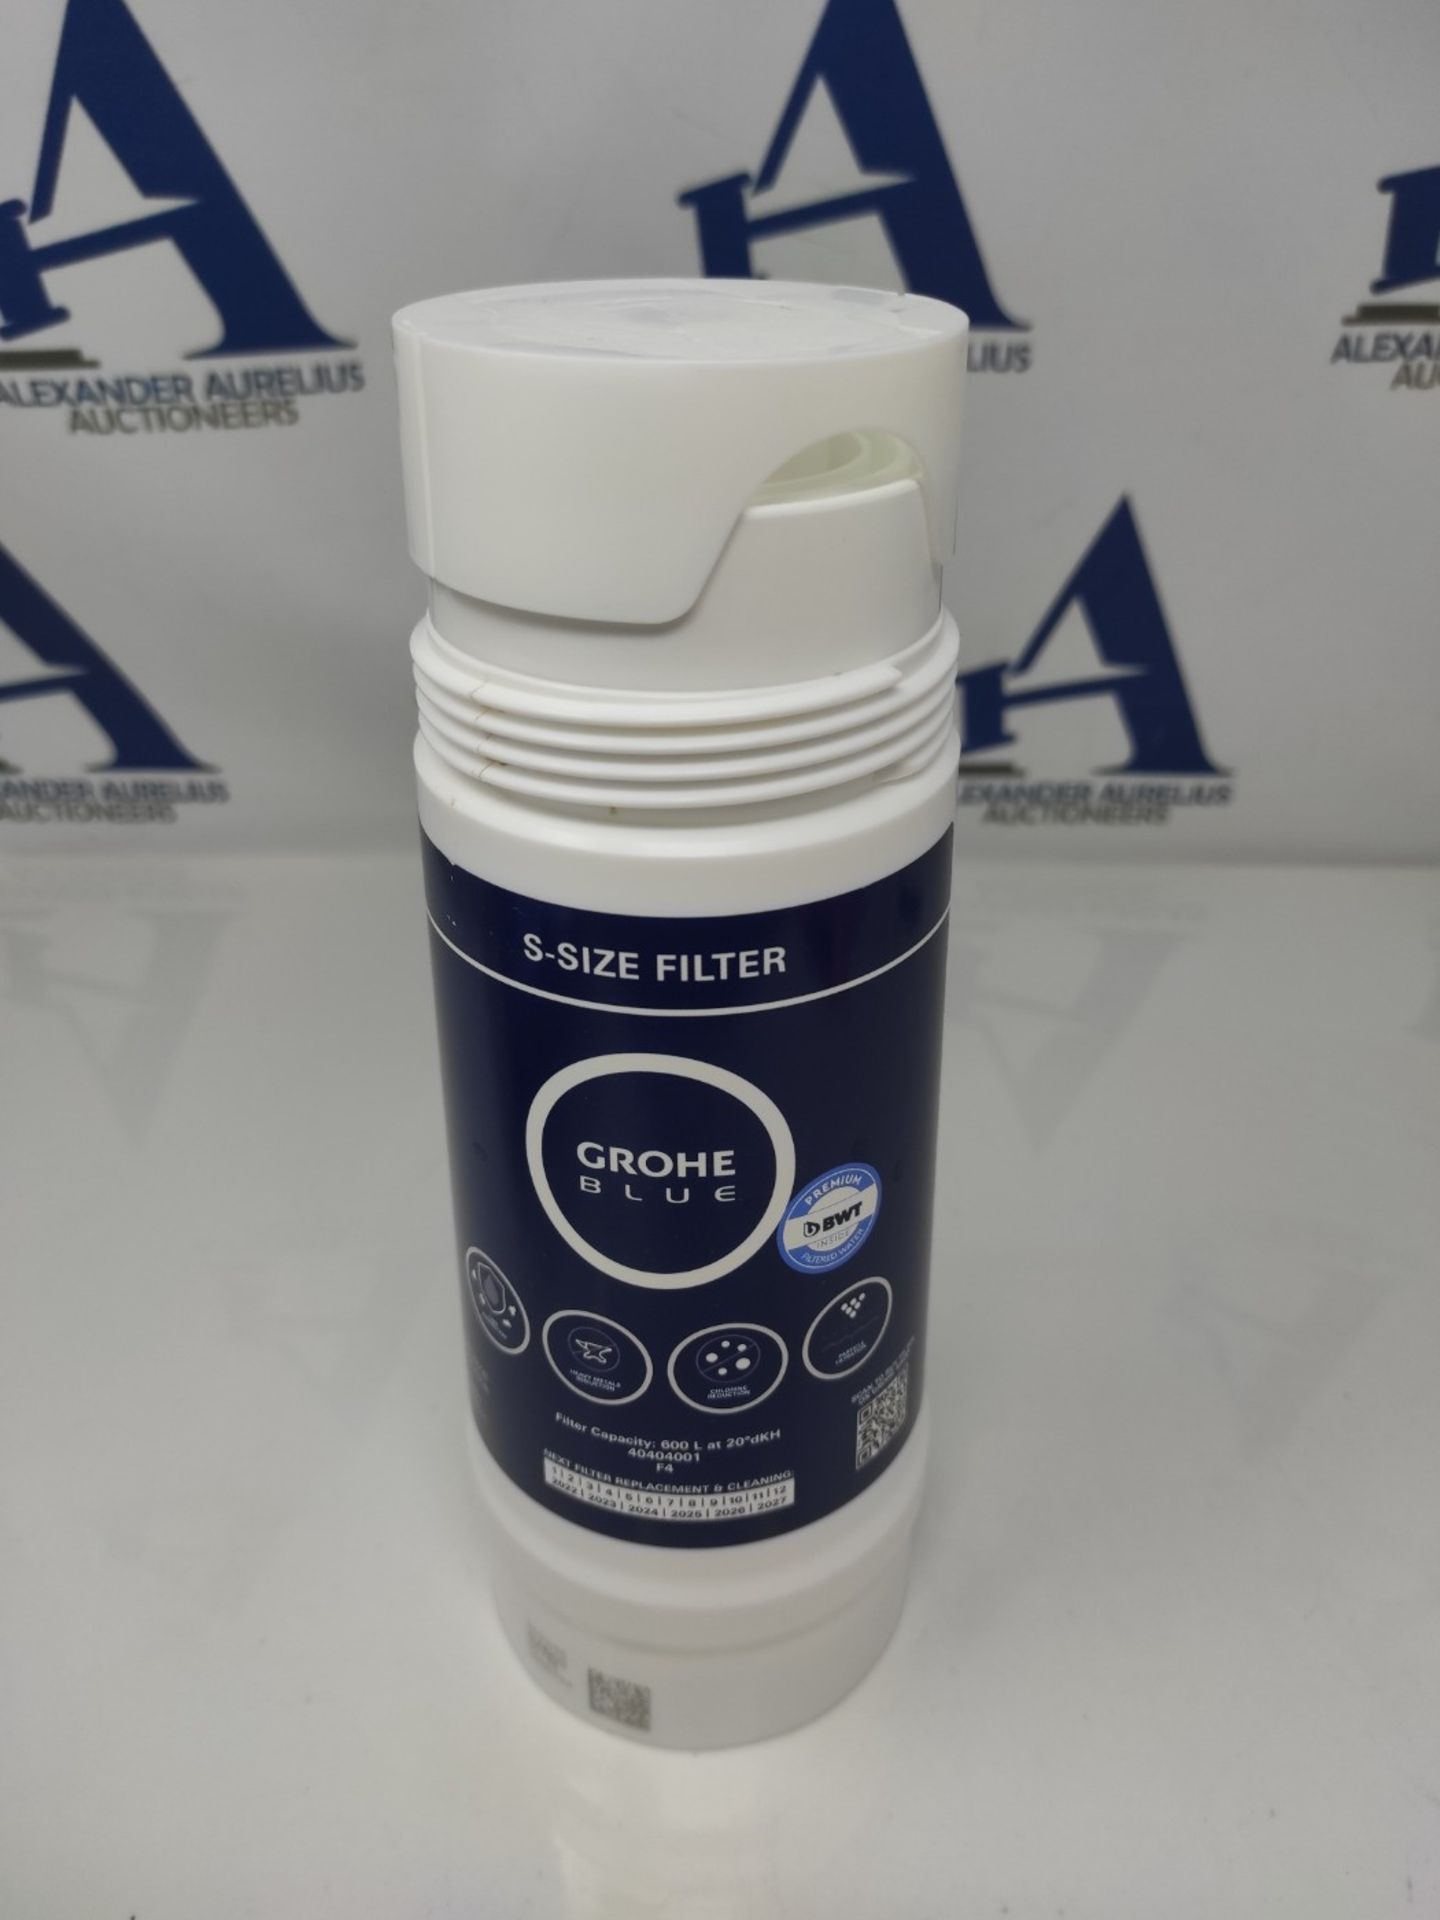 RRP £66.00 GROHE Blue - Replacement filter (S-Size, 600 liters at 20° dKH, 5-stage filter), 4040 - Bild 3 aus 3